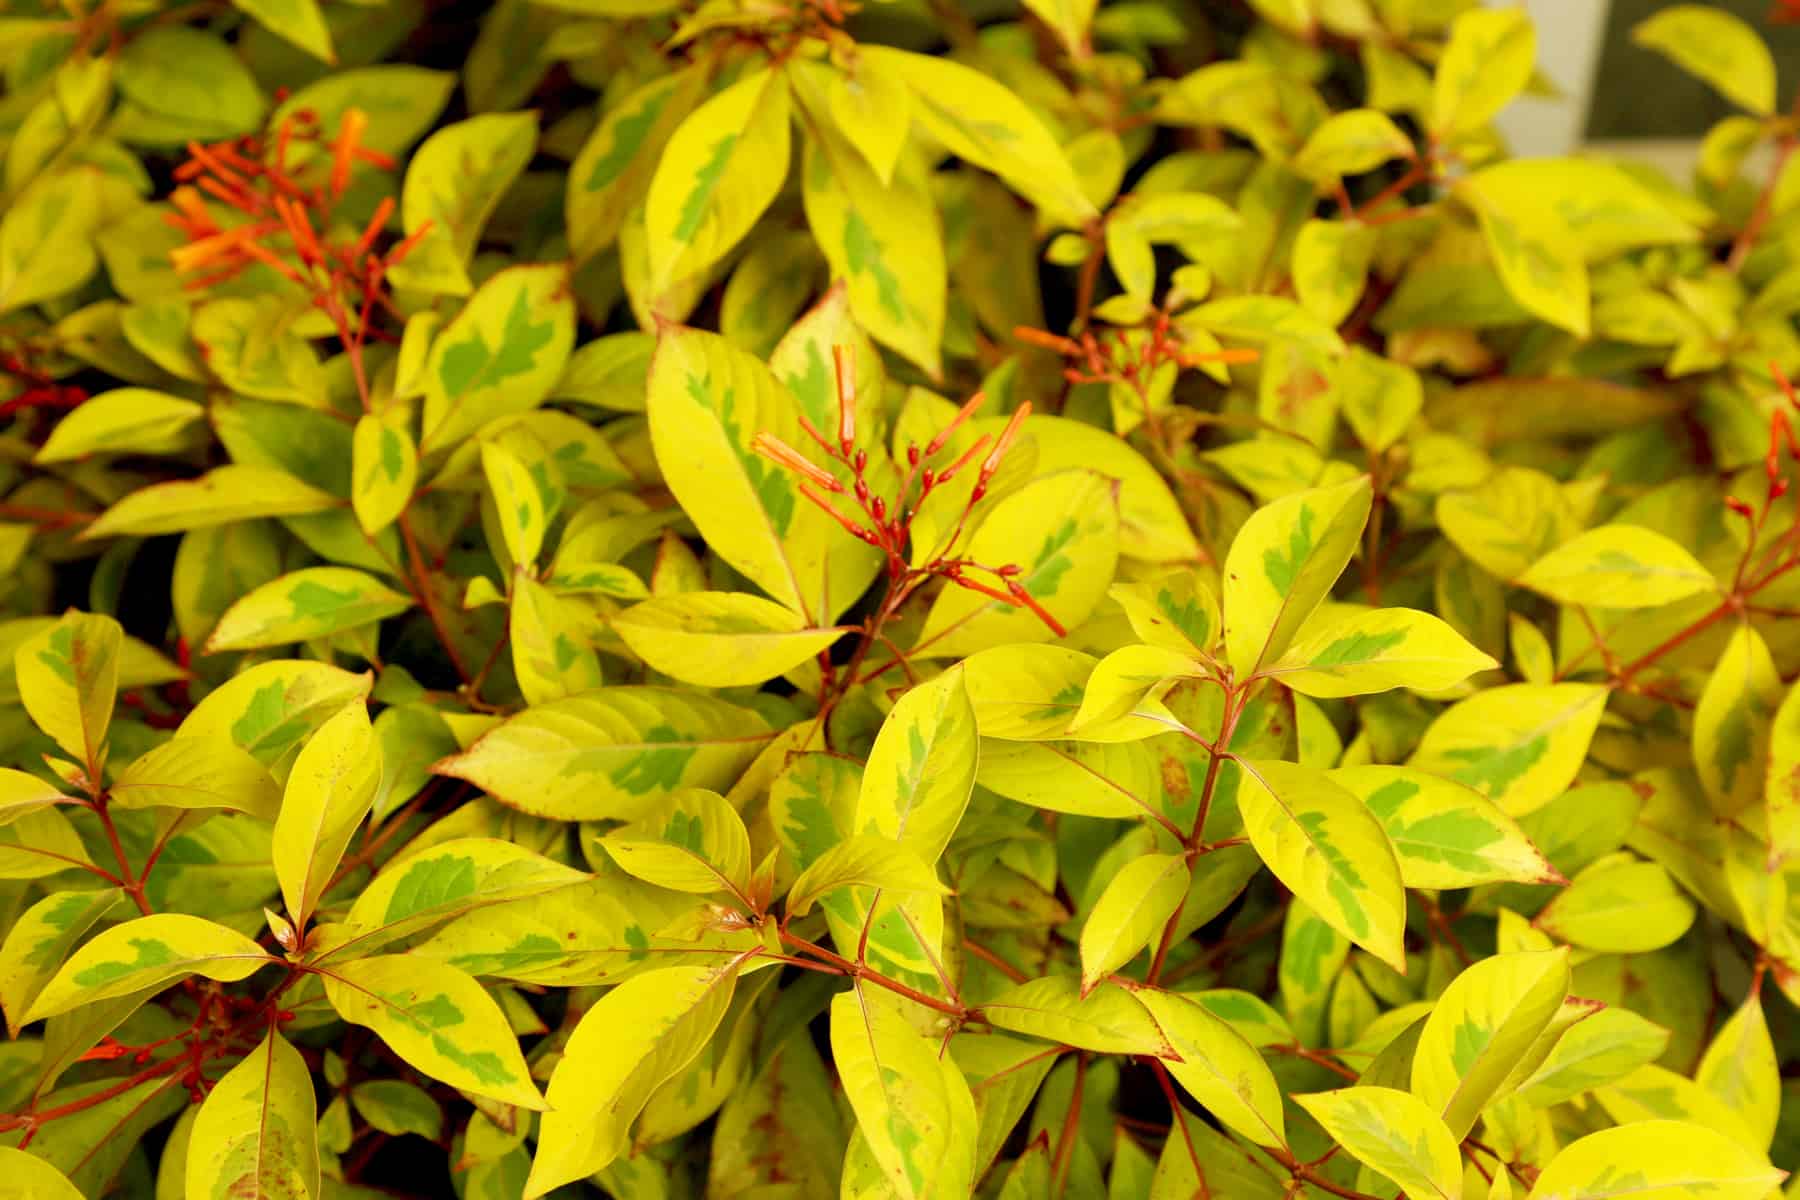 Lime Sizzler Firebush foliage at close up shows it's bright yellow leaf with green variegation and fire-red blooms